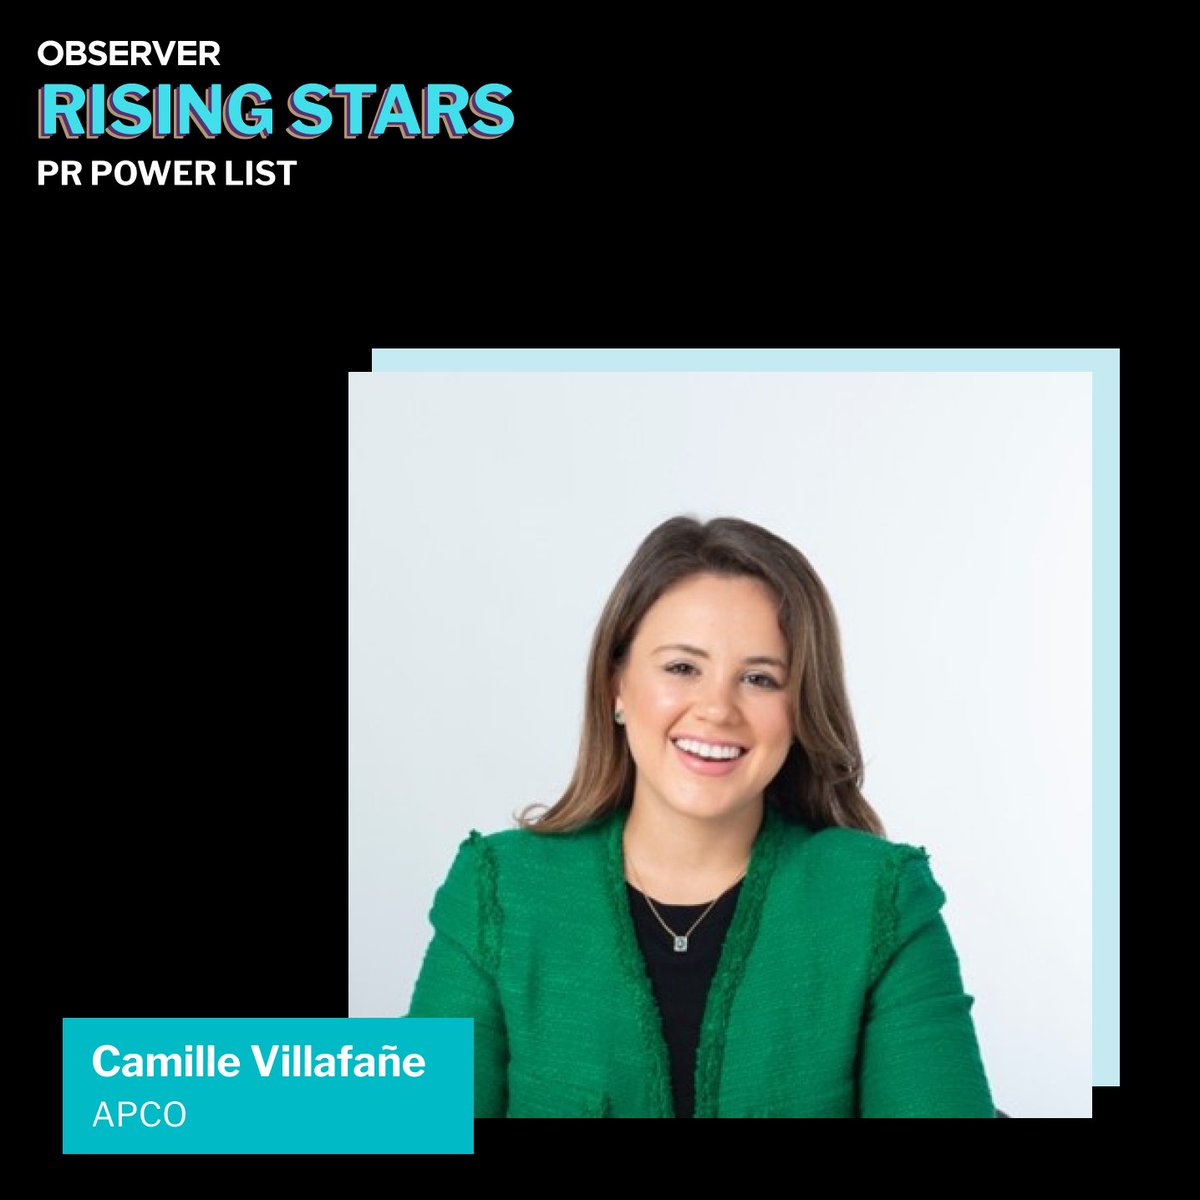 Congratulations to Camille Villafañe, who was named to @observer's 2024 roster of Rising Stars in PR! She represents the next generation of PR talent and was recognized for her work on international policy developments and issues management. View the full list of rising stars